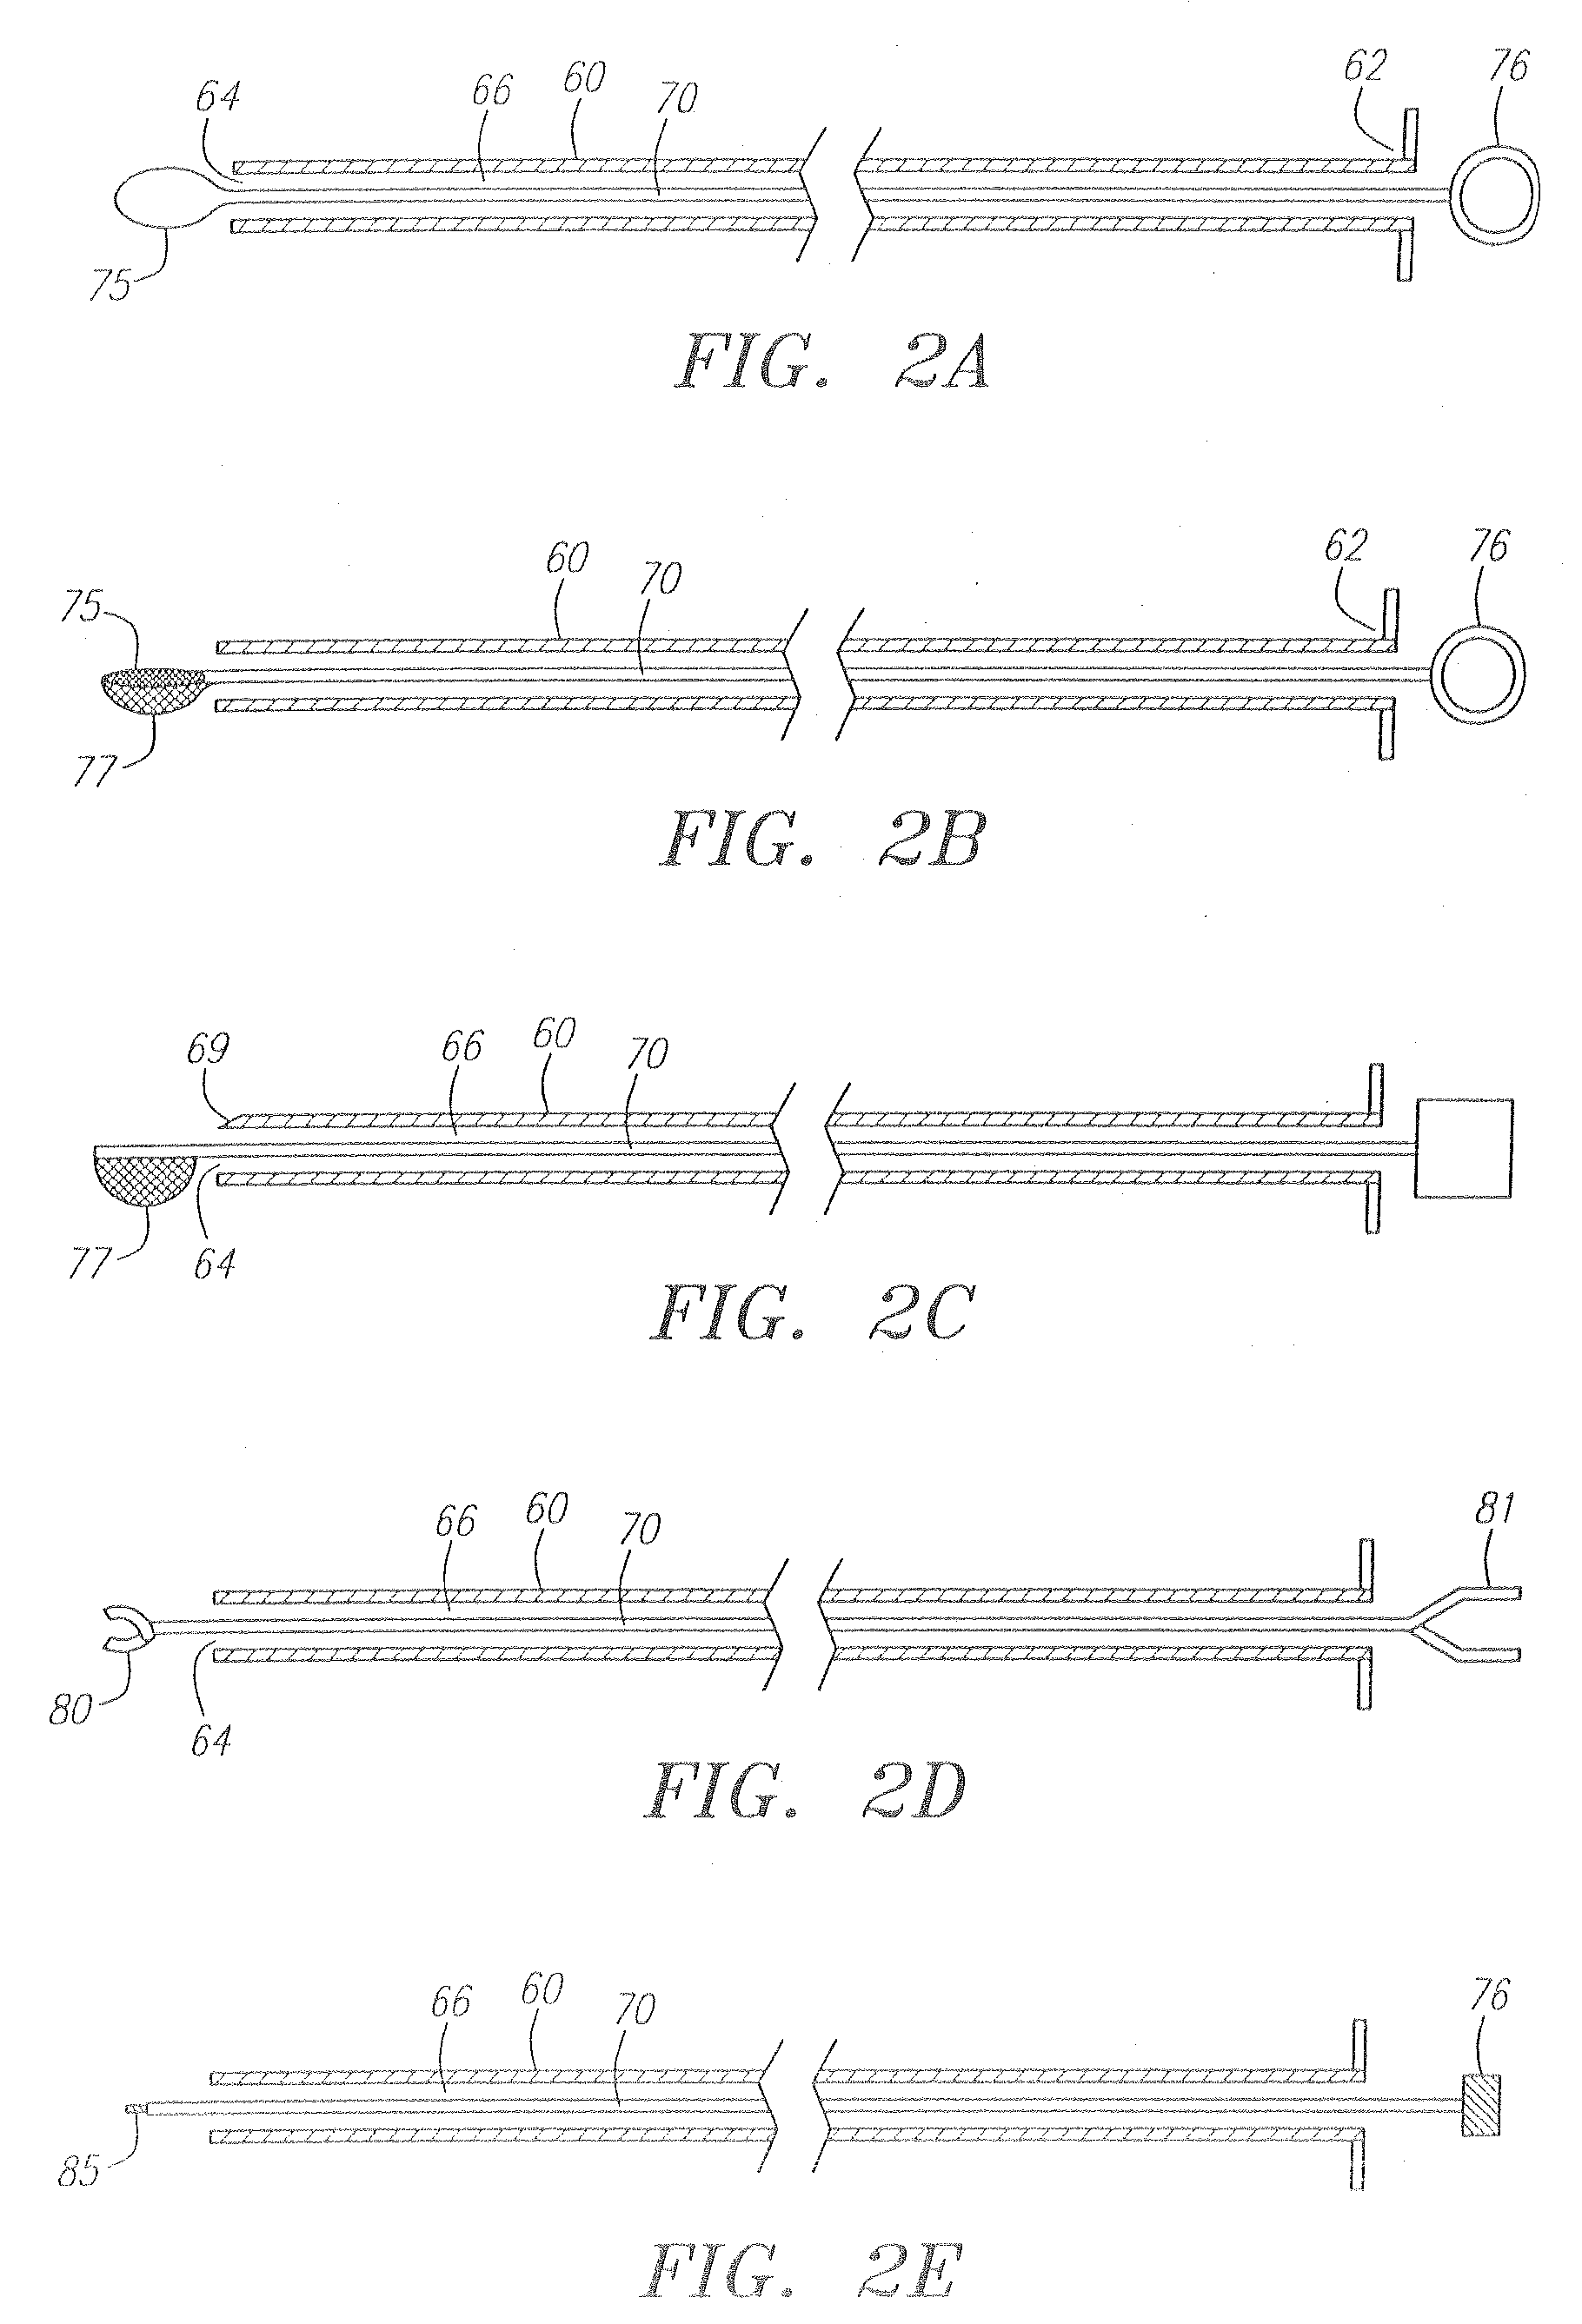 Direct Access Atherectomy Devices and Methods of Use